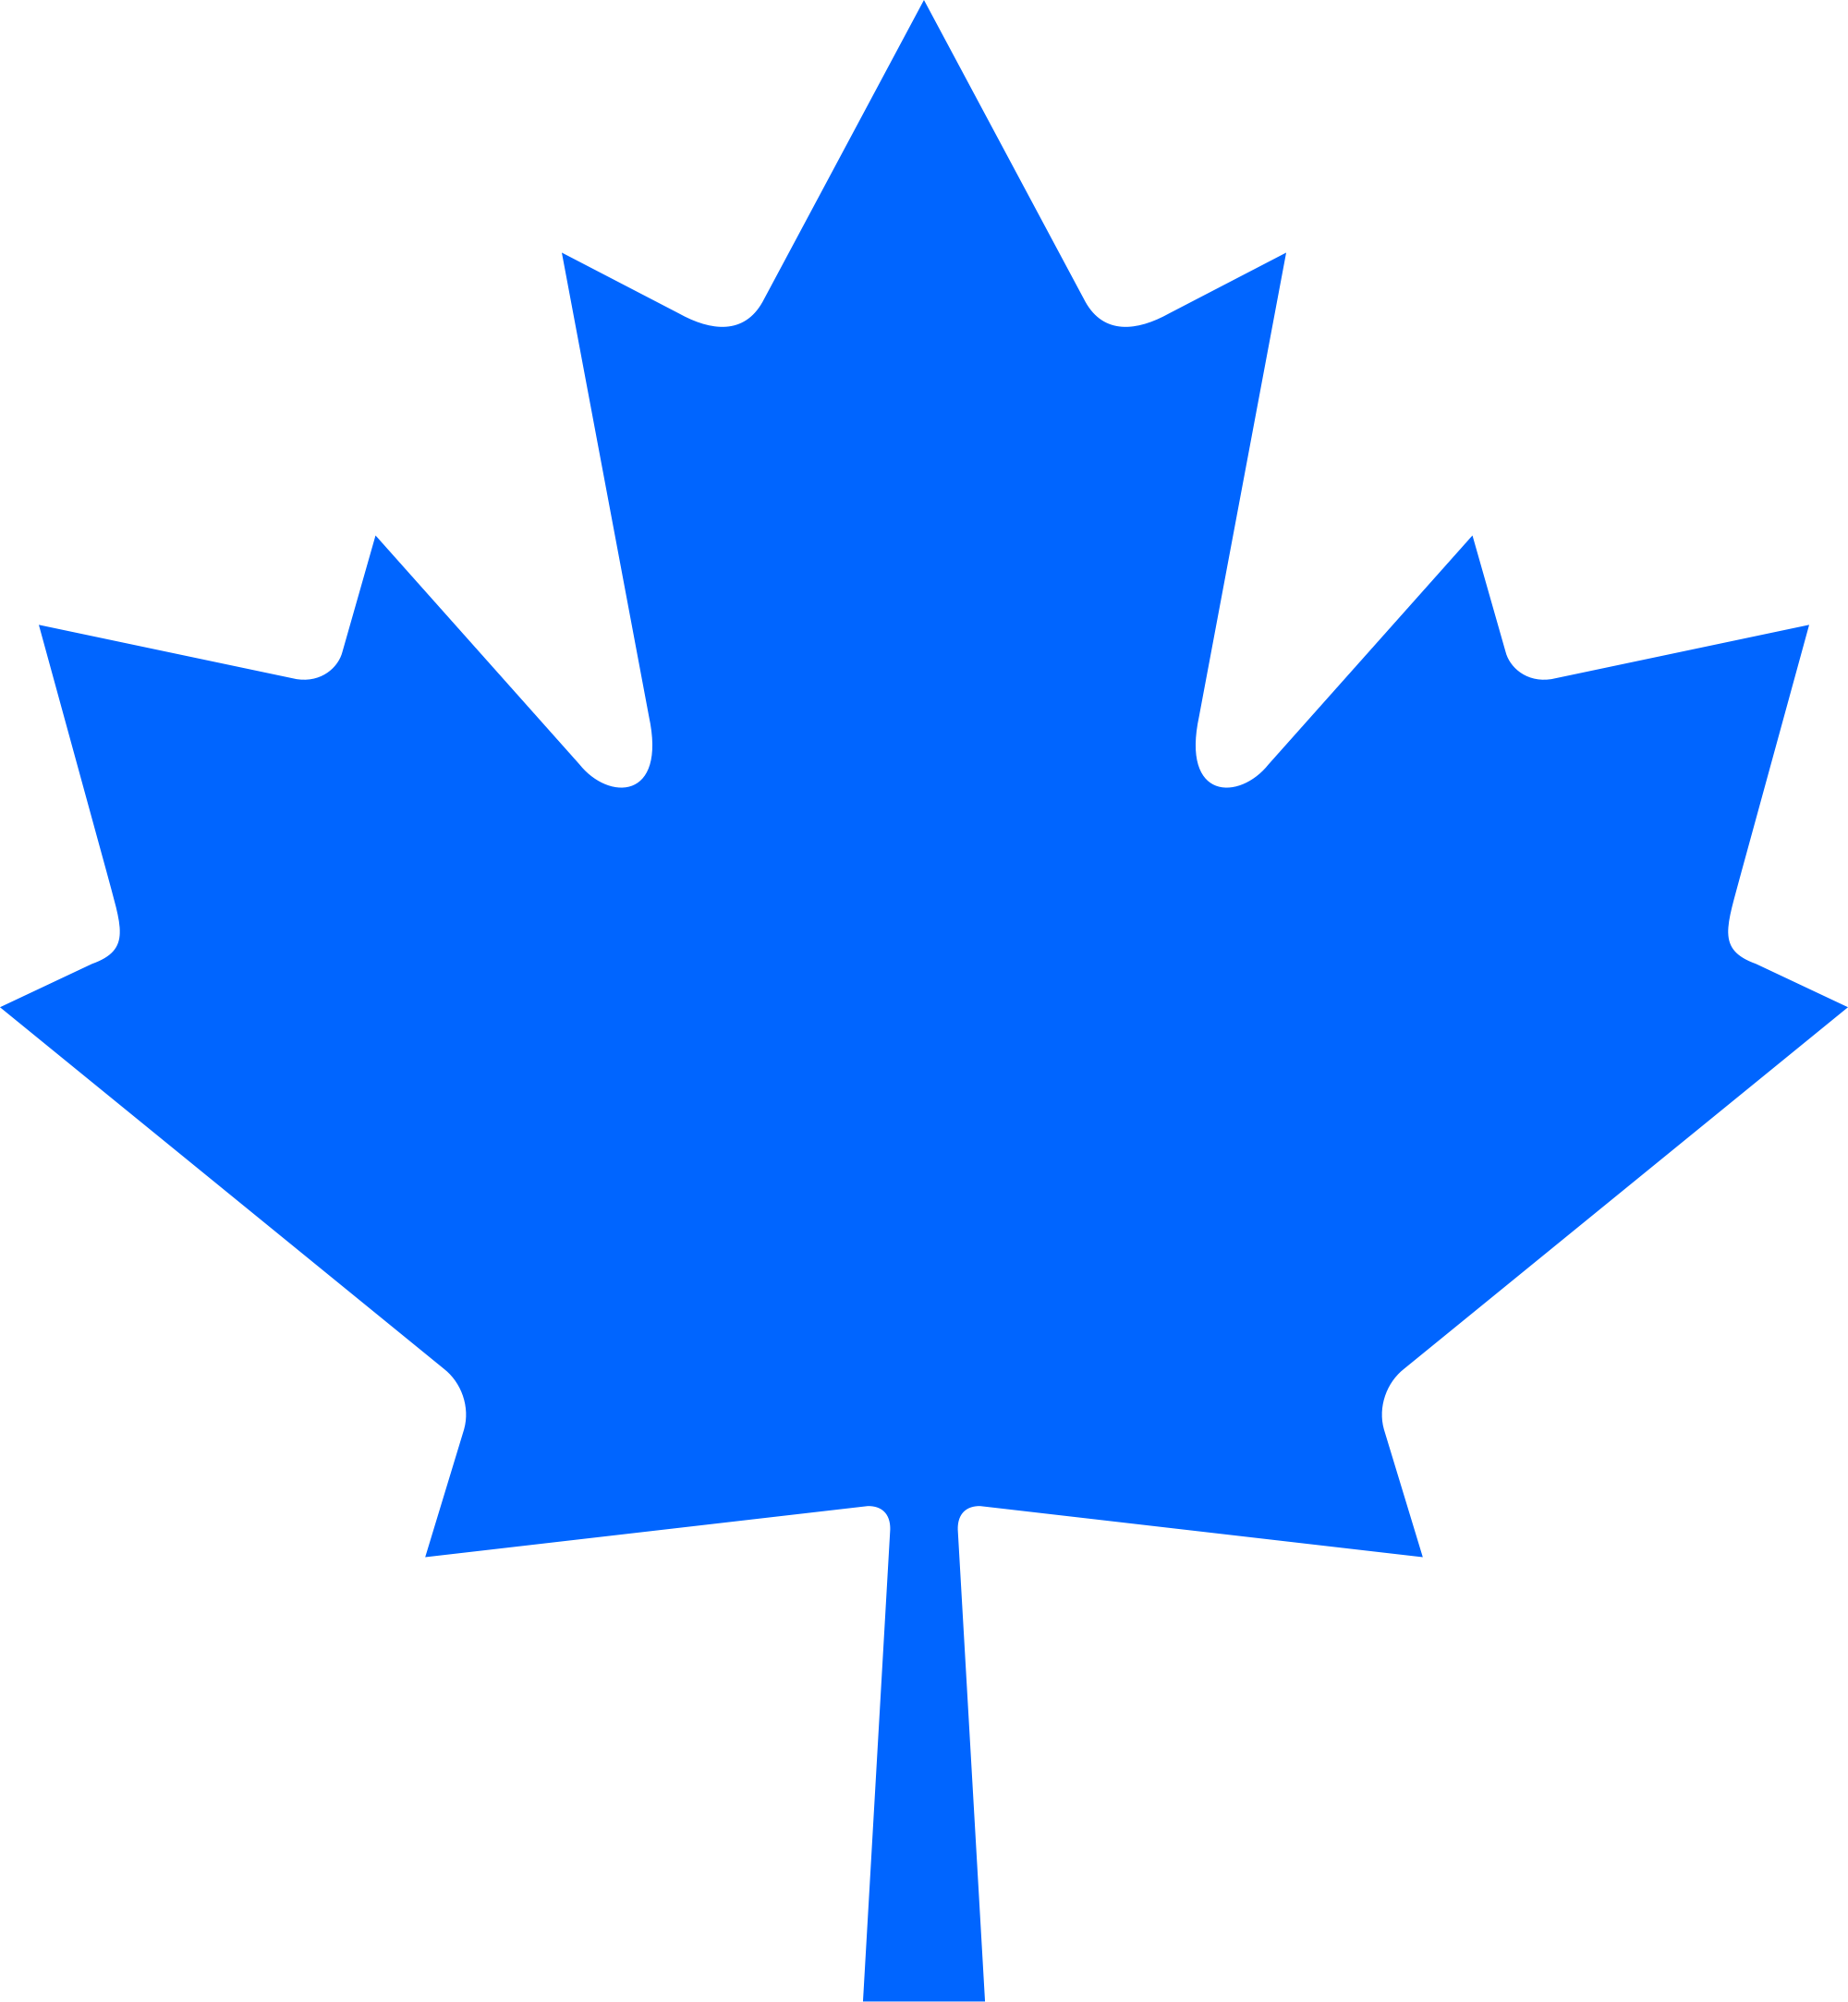 File:Conservative maple leaf, blue - Wikimedia Commons